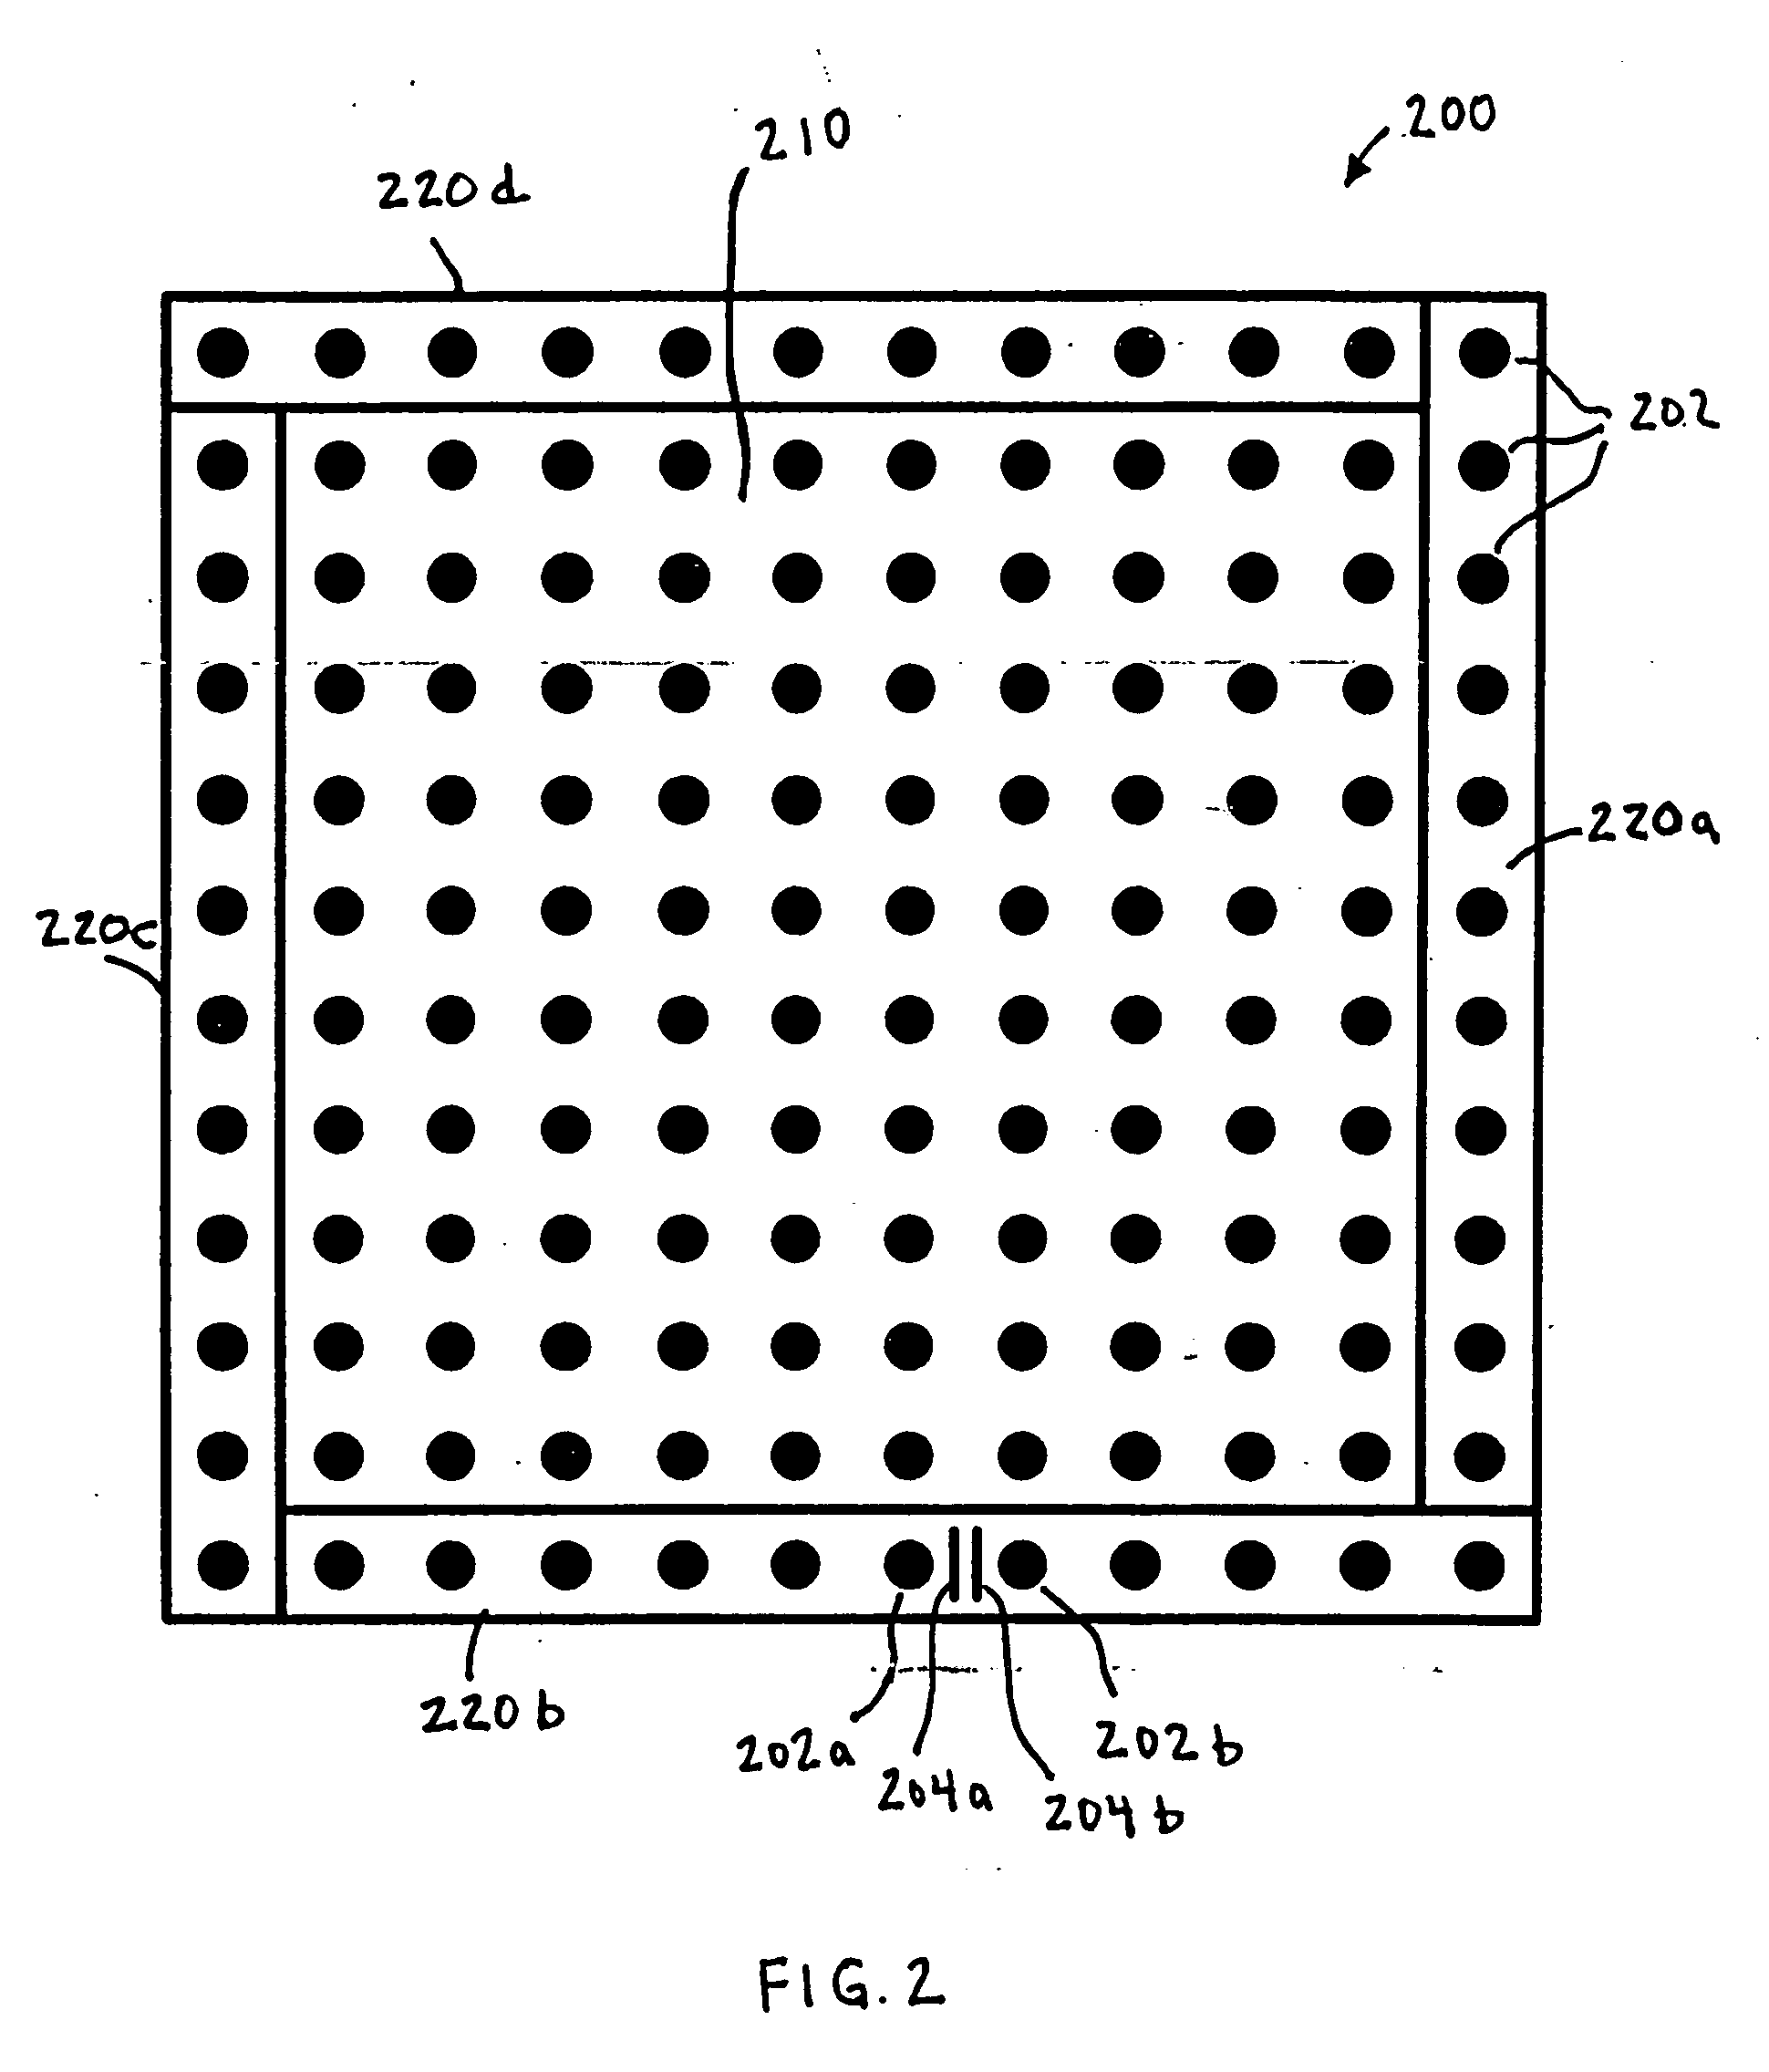 Optimization of routing layers and board space requirements for ball grid array package implementations including array corner considerations